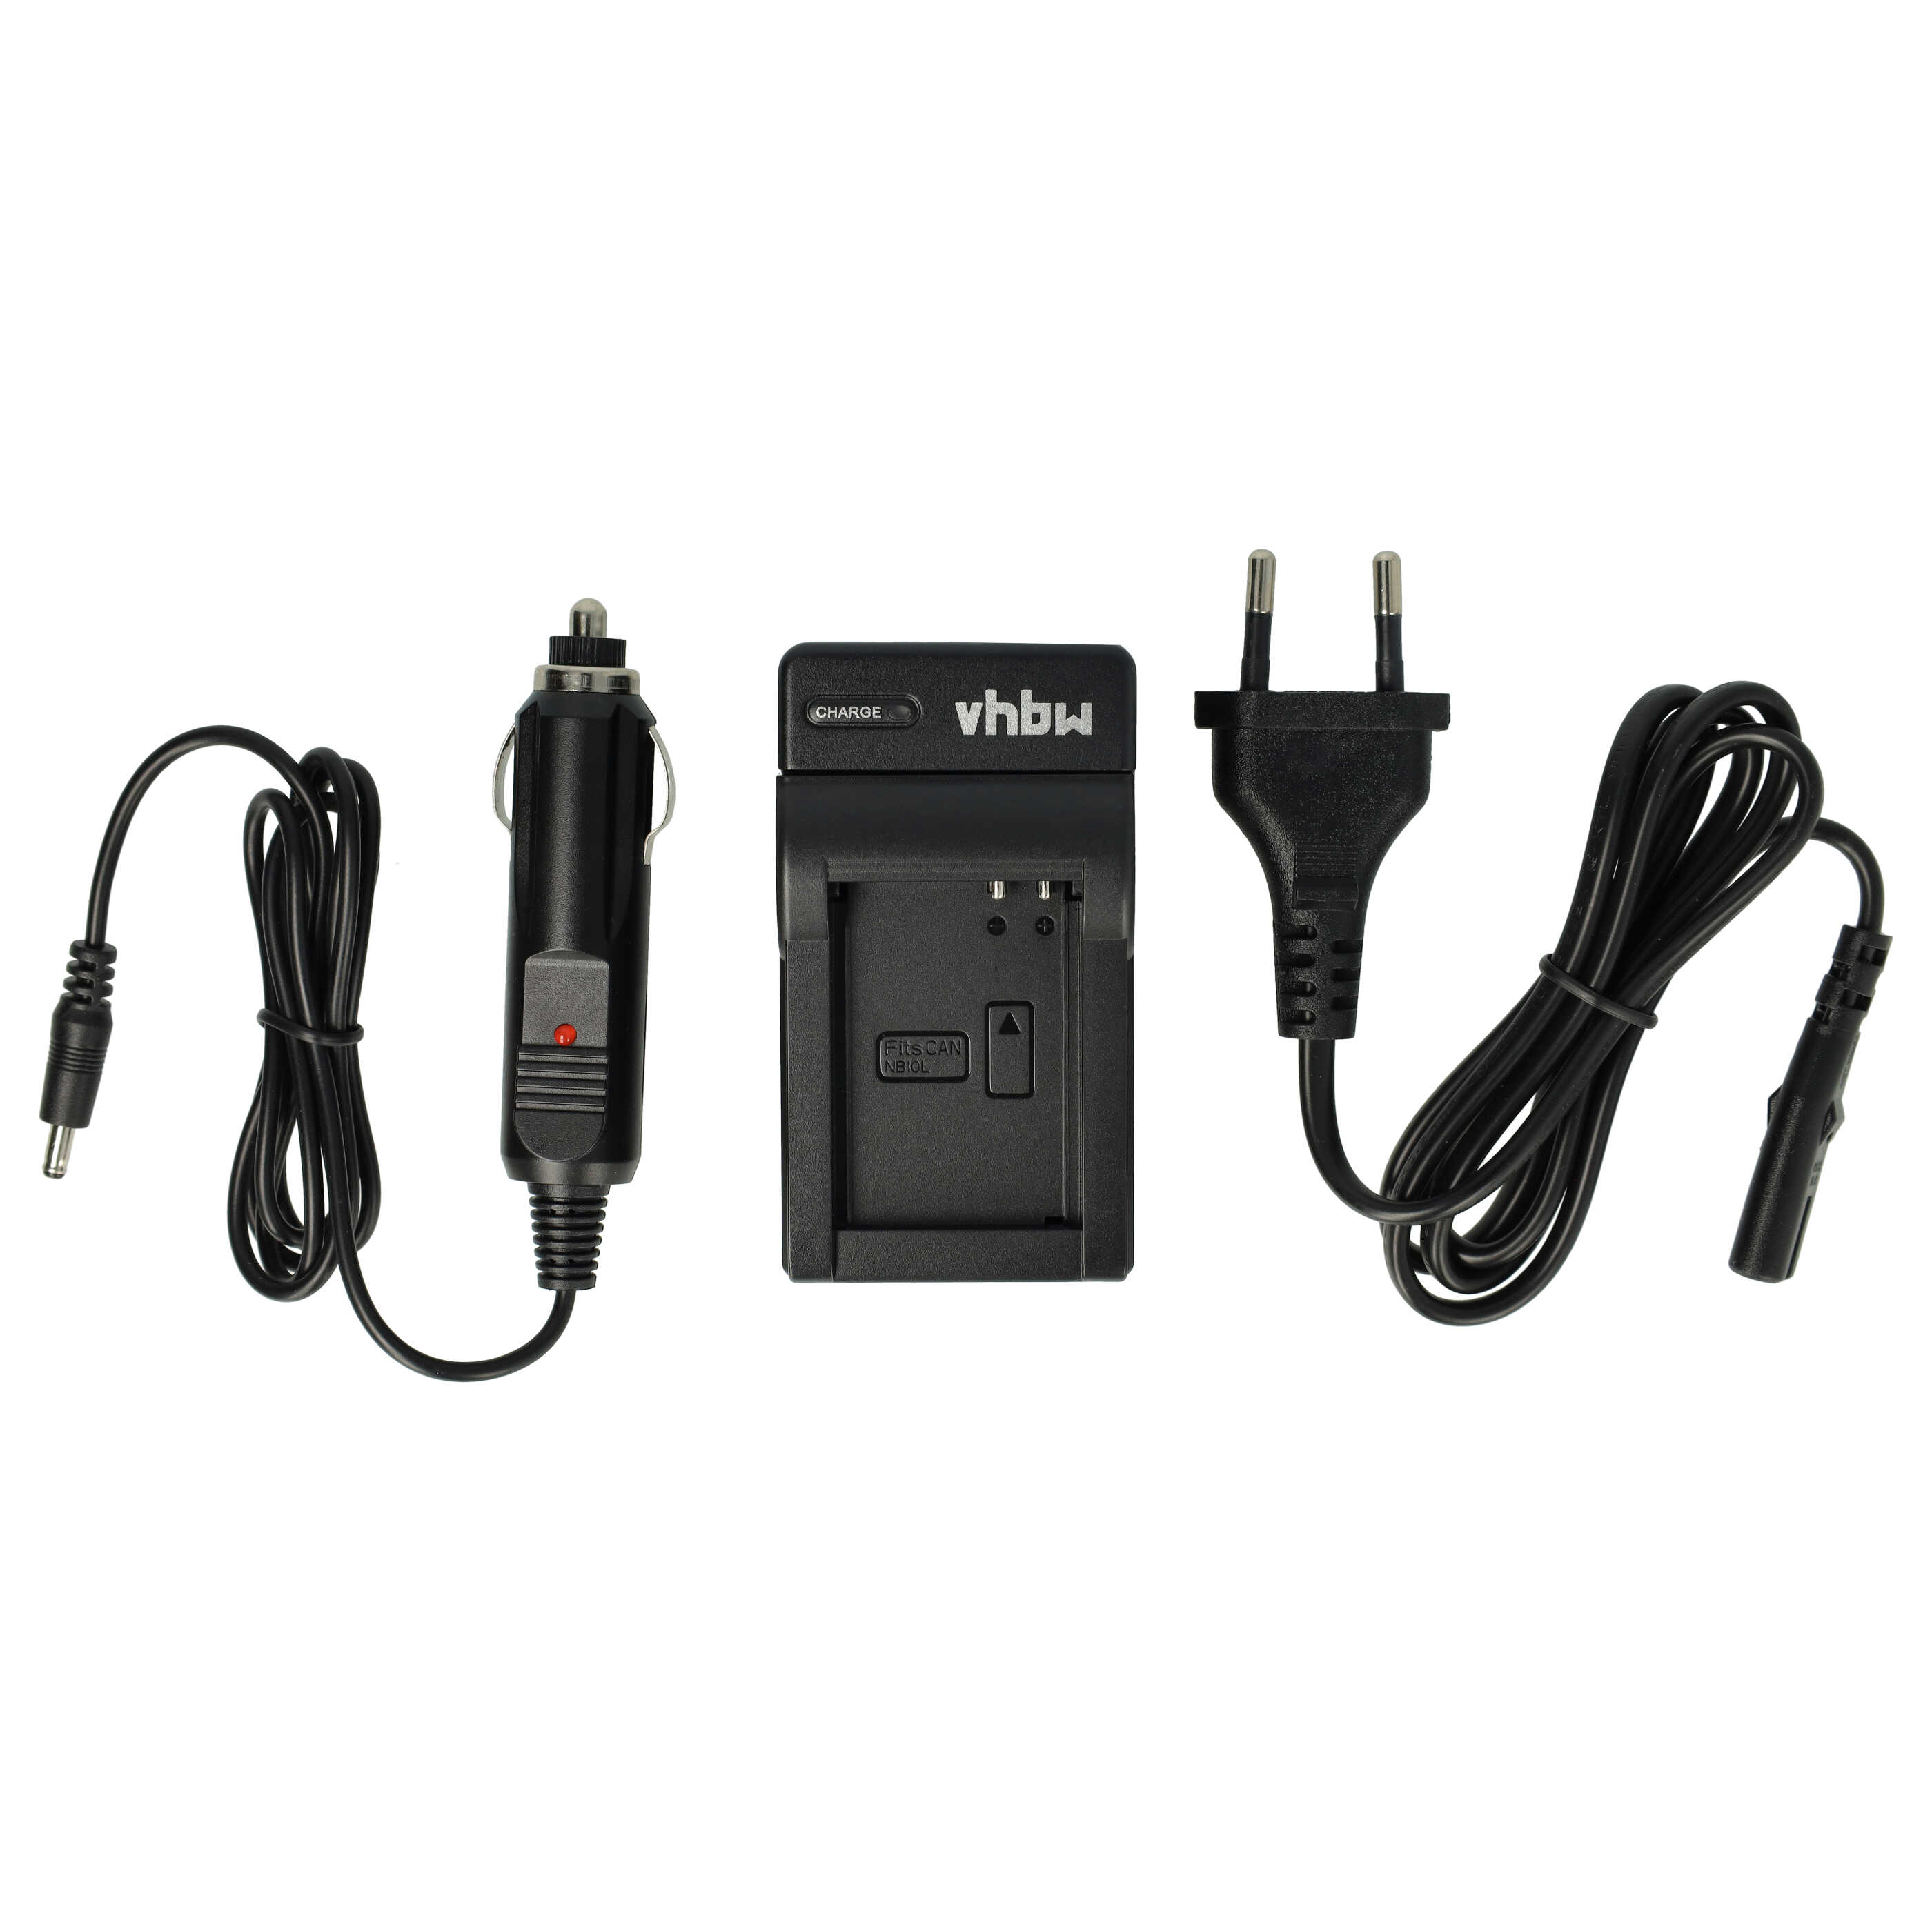 Battery Charger replaces Canon CB-2LCE suitable for Canon NB-10L Camera etc. - 0.6 A, 8.4 V